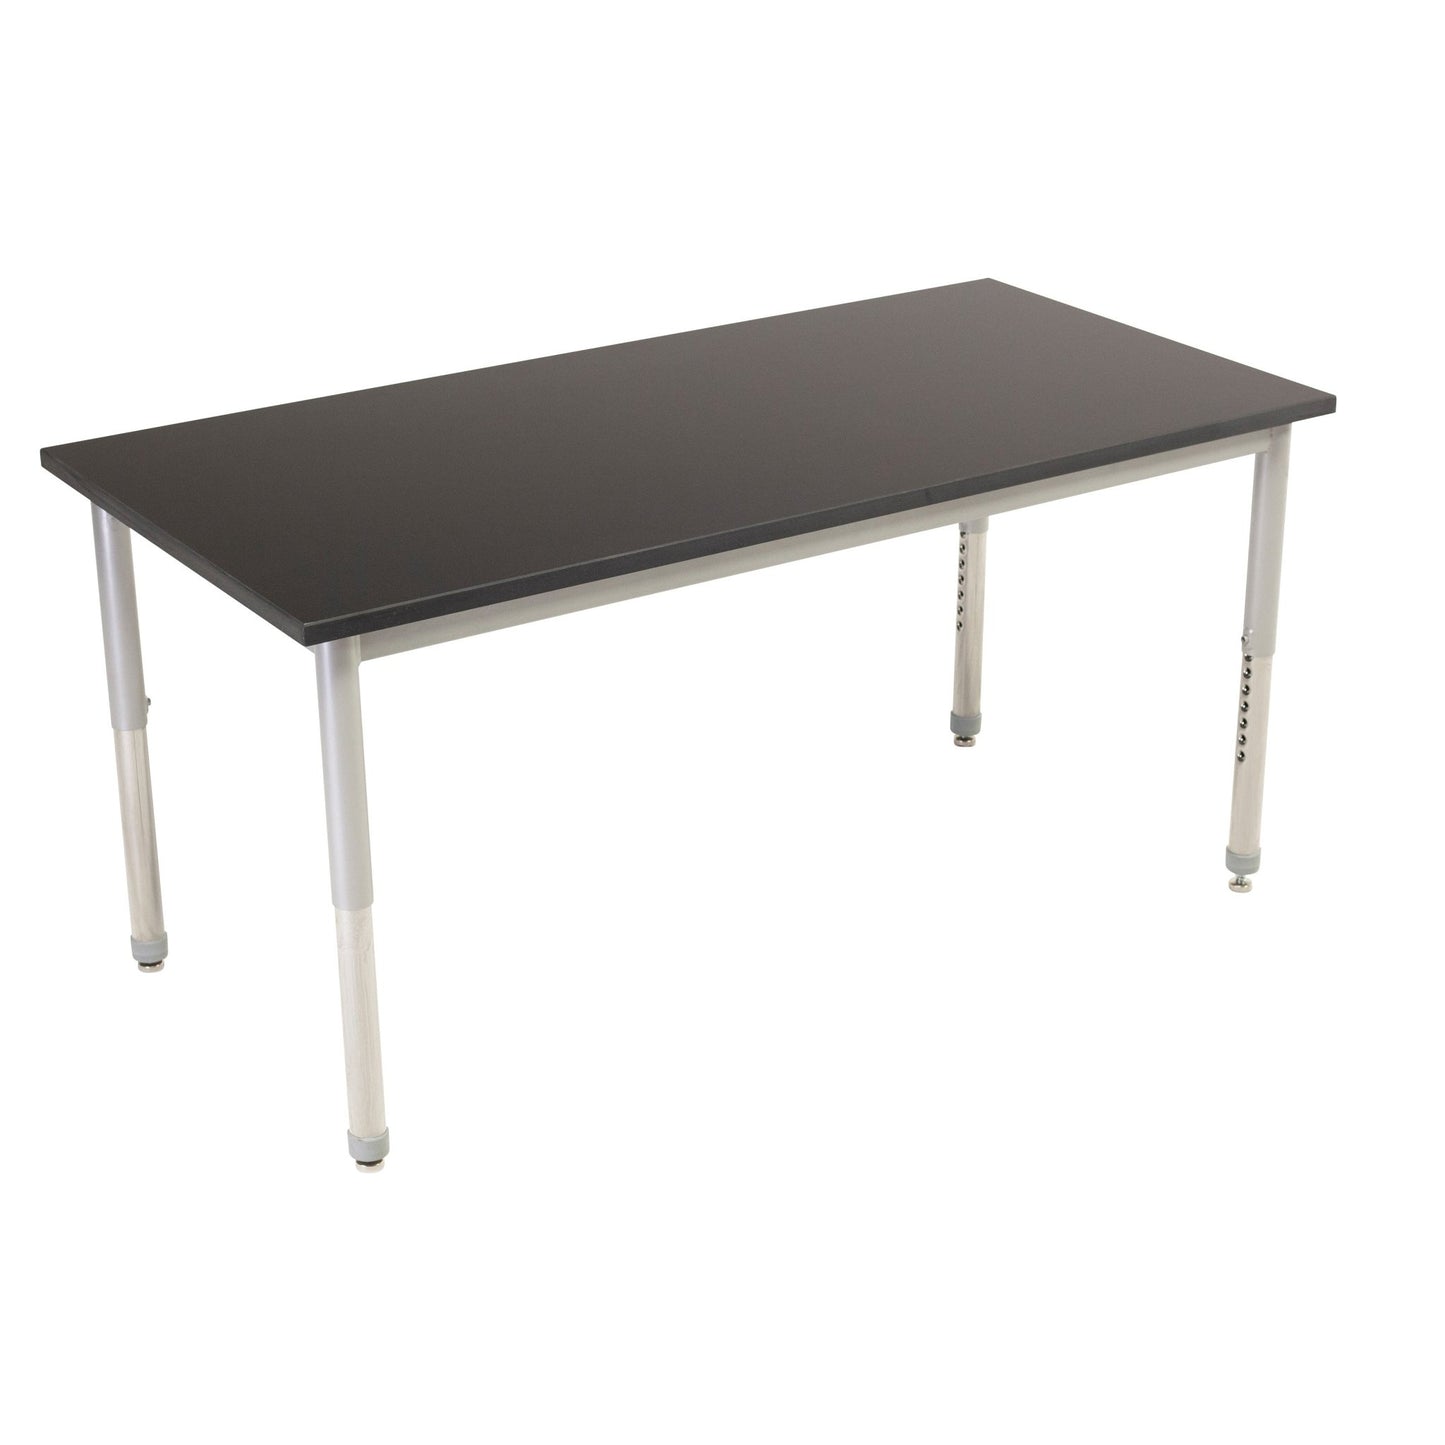 AmTab Science Lab Table - 30"W x 48"L x Adjustable Height 30" to 38" - Phenolic Resin Chem Res Top (AMT-SCI304PR) - SchoolOutlet